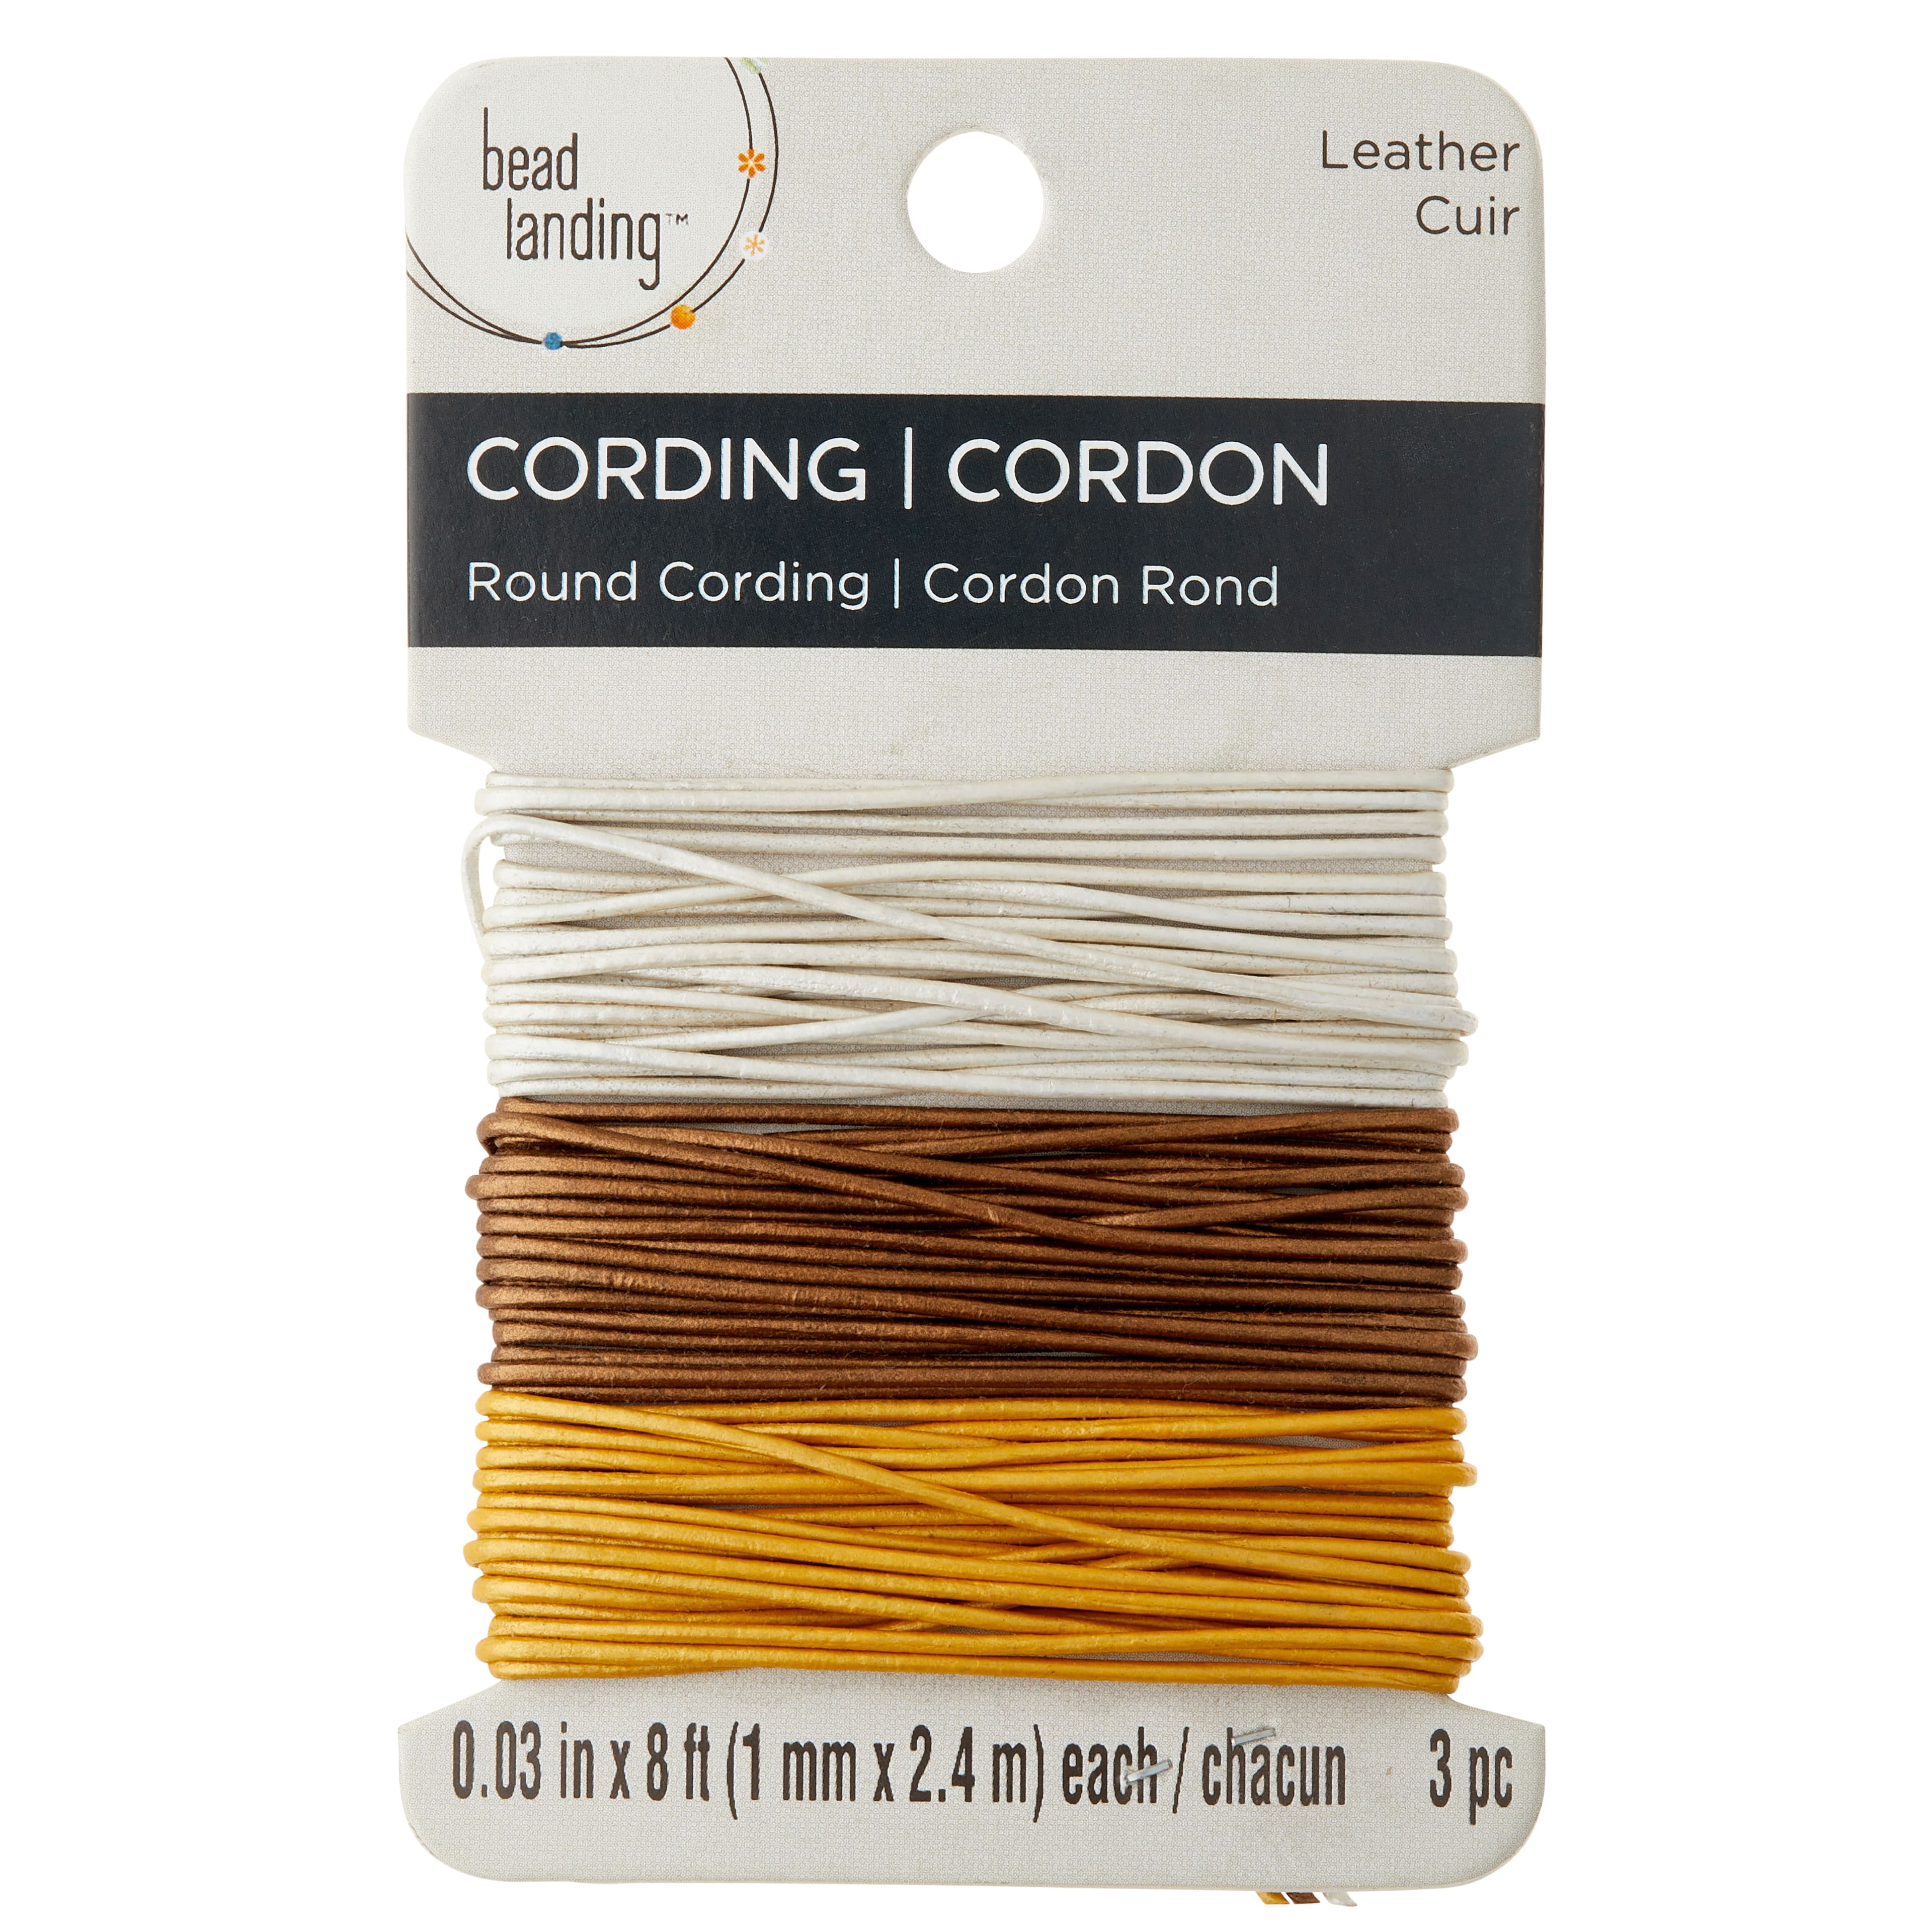 12 Packs: 1mm Metallic Round Leather Cording Pack by Bead Landing™